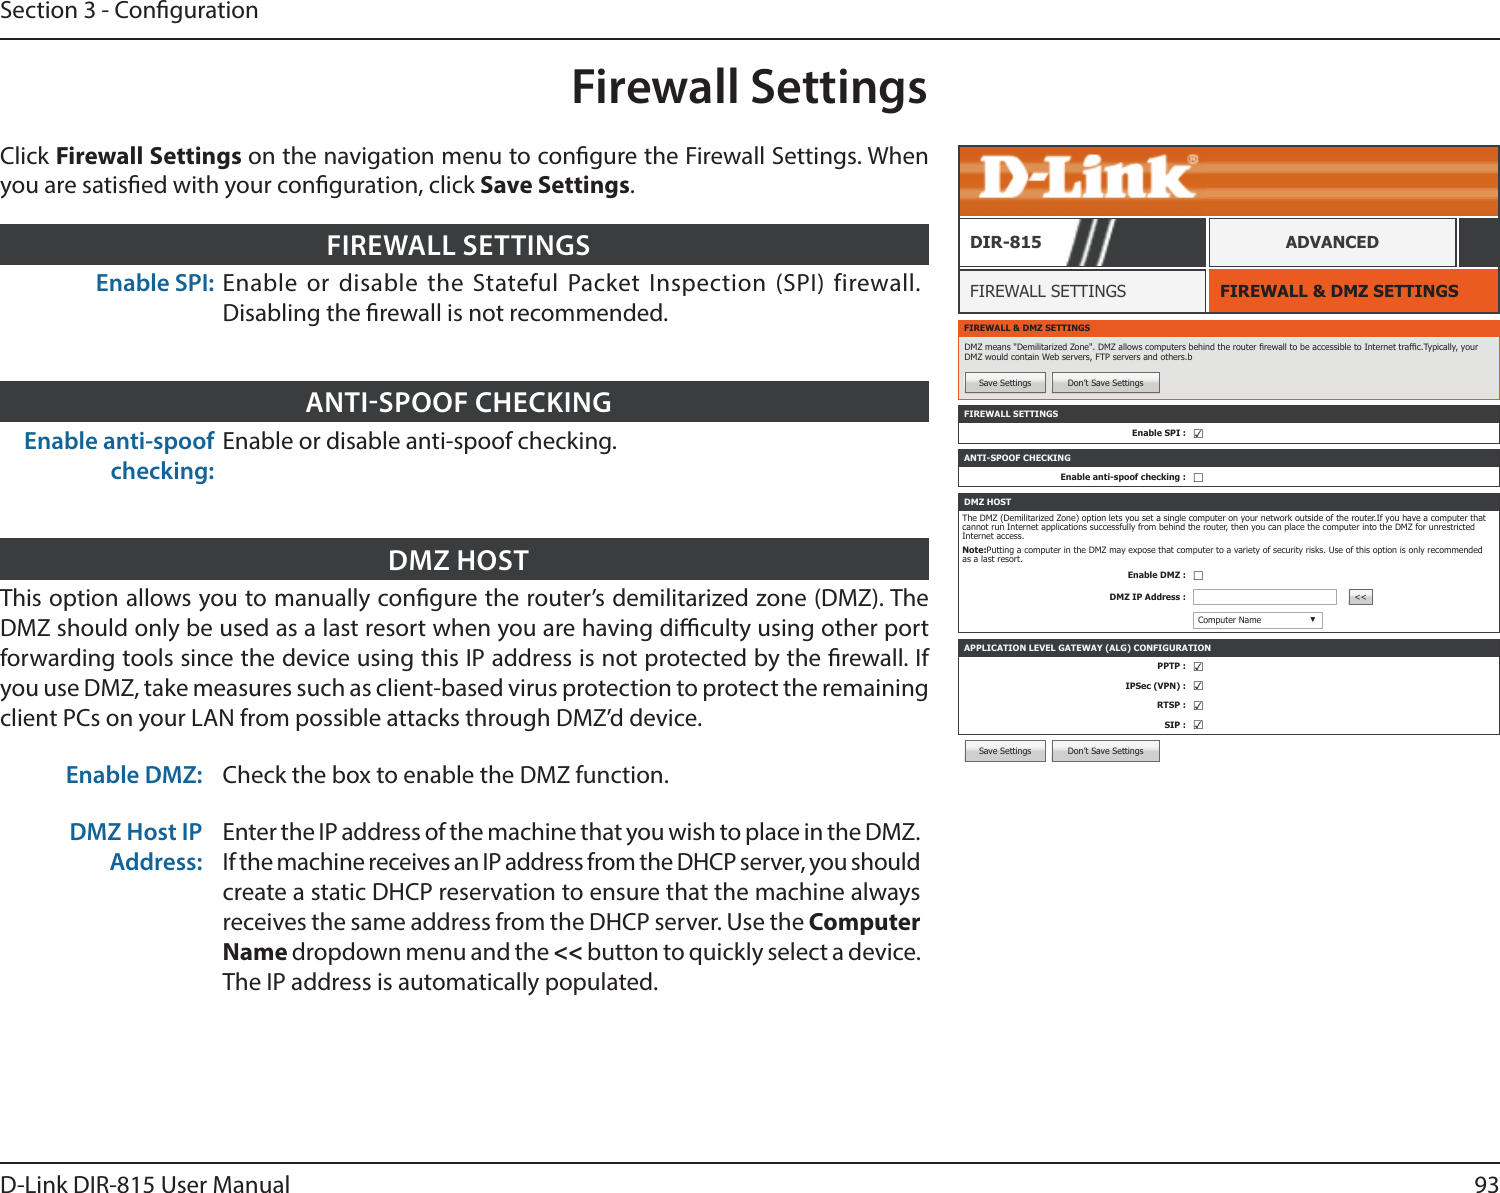 93D-Link DIR-815 User ManualSection 3 - CongurationSave Settings Don’t Save SettingsFirewall SettingsFIREWALL &amp; DMZ SETTINGSFIREWALL SETTINGSDIR-815 ADVANCEDEnable SPI: Enable or disable the Stateful Packet Inspection (SPI) firewall. Disabling the rewall is not recommended.FIREWALL SETTINGSFIREWALL &amp; DMZ SETTINGSDMZ means &quot;Demilitarized Zone&quot;. DMZ allows computers behind the router rewall to be accessible to Internet trafc.Typically, your DMZ would contain Web servers, FTP servers and others.bSave Settings Don’t Save SettingsFIREWALL SETTINGSEnable SPI : ☑APPLICATION LEVEL GATEWAY (ALG) CONFIGURATIONPPTP : ☑IPSec (VPN) : ☑RTSP : ☑SIP : ☑ANTI-SPOOF CHECKINGEnable anti-spoof checking : ☐DMZ HOSTThe DMZ (Demilitarized Zone) option lets you set a single computer on your network outside of the router.If you have a computer that cannot run Internet applications successfully from behind the router, then you can place the computer into the DMZ for unrestricted Internet access.Note:Putting a computer in the DMZ may expose that computer to a variety of security risks. Use of this option is only recommended as a last resort.Enable DMZ : ☐DMZ IP Address : &lt;&lt;Computer Name ▼Enable anti-spoof checking:Enable or disable anti-spoof checking.ANTISPOOF CHECKINGThis option allows you to manually congure the router’s demilitarized zone (DMZ). The DMZ should only be used as a last resort when you are having diculty using other port forwarding tools since the device using this IP address is not protected by the rewall. If you use DMZ, take measures such as client-based virus protection to protect the remaining client PCs on your LAN from possible attacks through DMZ’d device. Enable DMZ: Check the box to enable the DMZ function.DMZ Host IP Address:Enter the IP address of the machine that you wish to place in the DMZ. If the machine receives an IP address from the DHCP server, you should create a static DHCP reservation to ensure that the machine always receives the same address from the DHCP server. Use the Computer Name dropdown menu and the &lt;&lt; button to quickly select a device. The IP address is automatically populated.DMZ HOSTClick Firewall Settings on the navigation menu to congure the Firewall Settings. When you are satised with your conguration, click Save Settings.